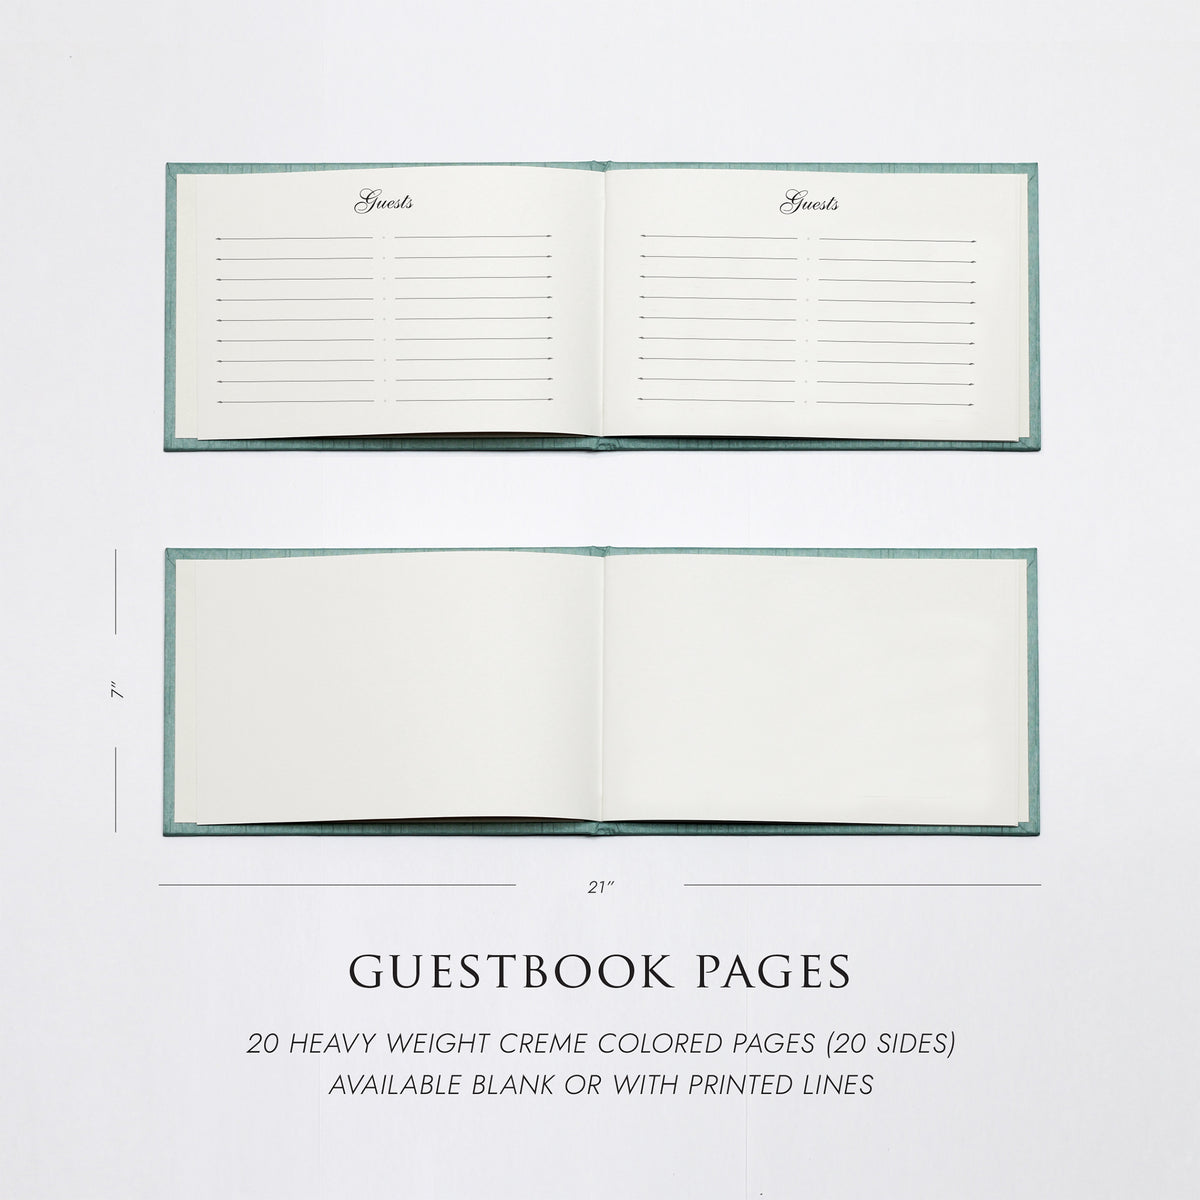 Guestbook Embossed with “Guests” | Cover: Emerald Silk | Available Personalized